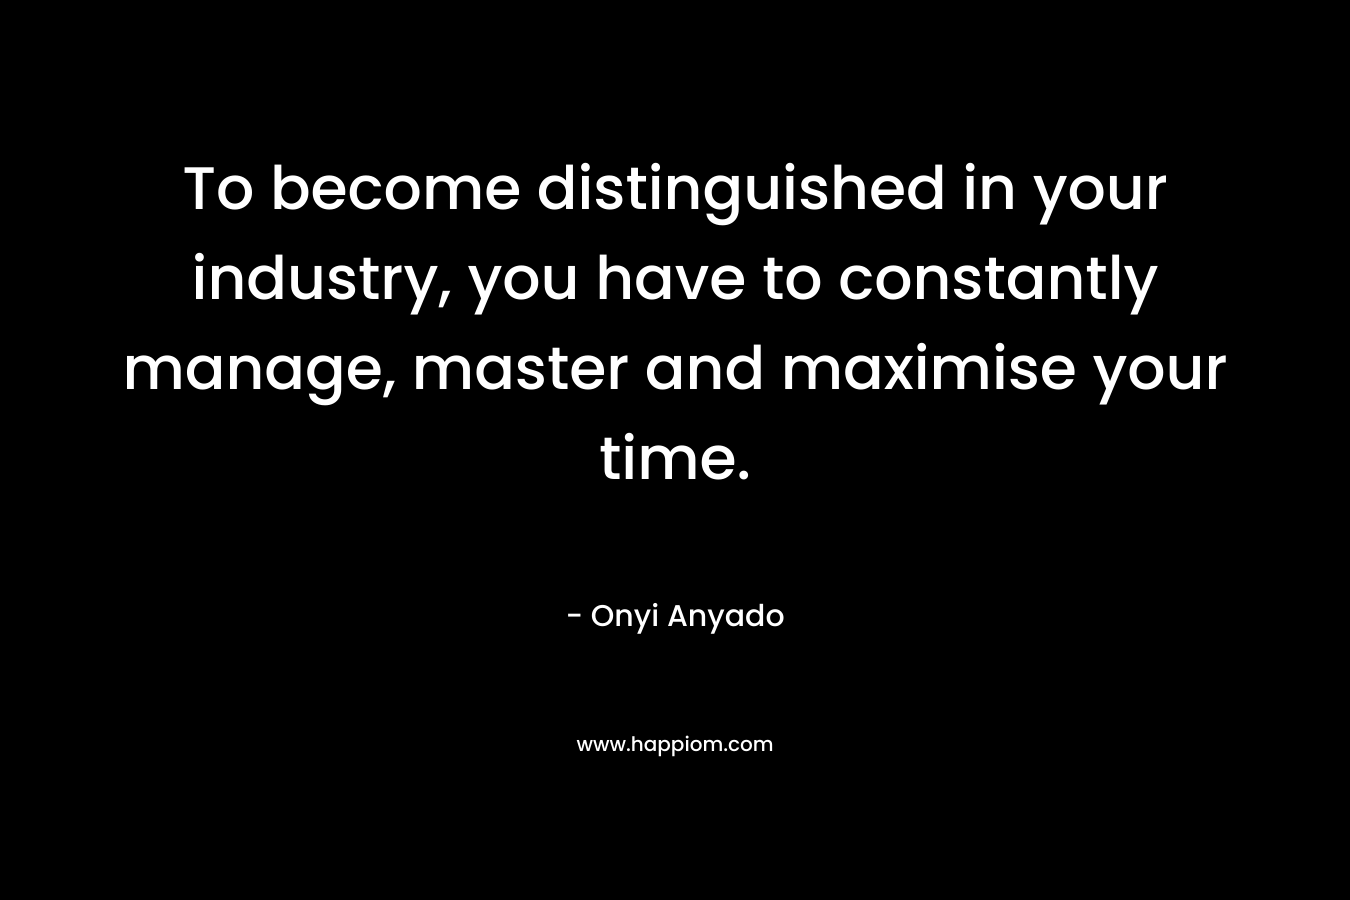 To become distinguished in your industry, you have to constantly manage, master and maximise your time. – Onyi Anyado